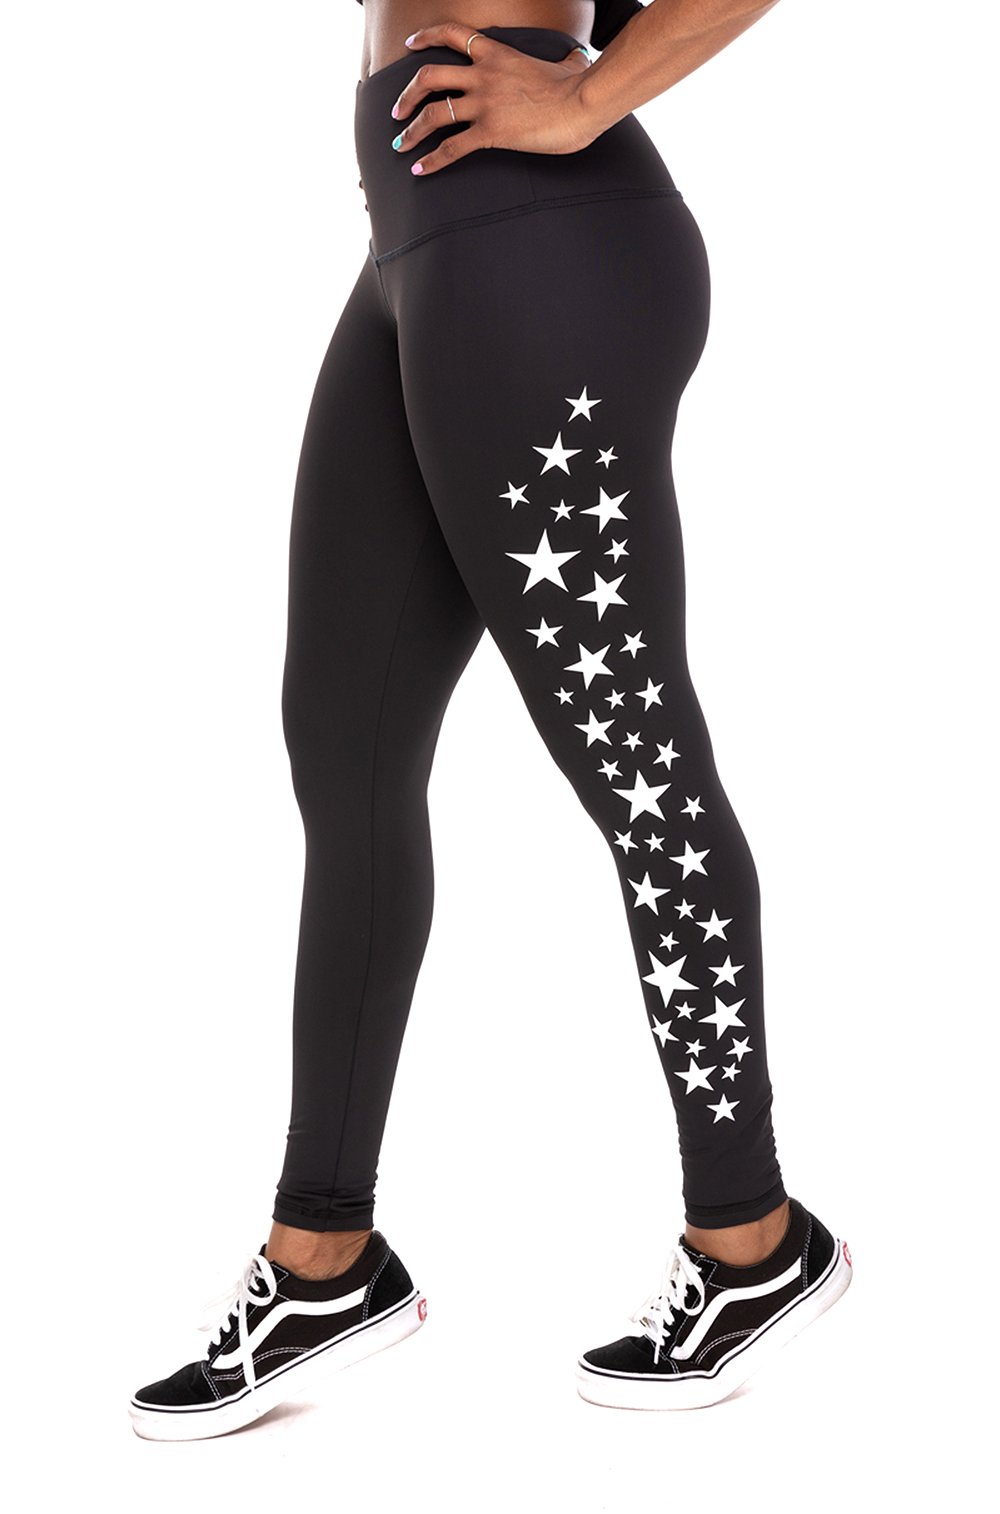 13 Workout Leggings That Can Pass as Pants This Summer